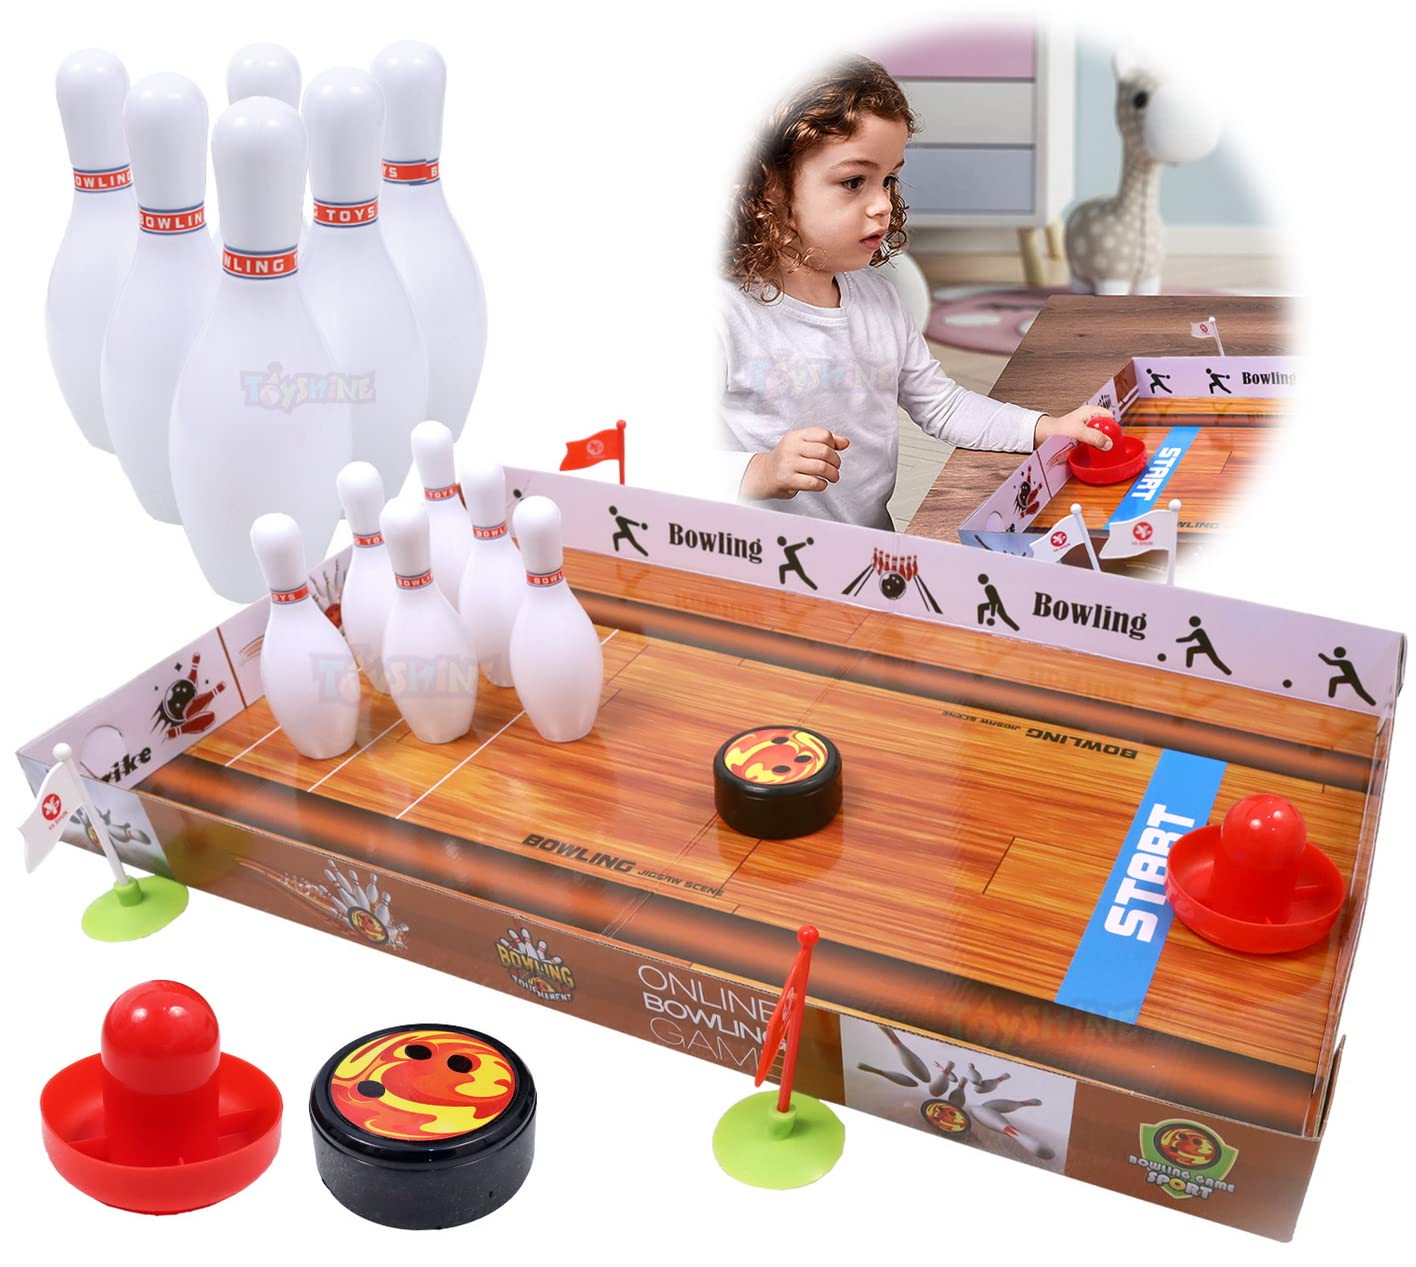 Toyshine Slide and Play Table Bowling Game